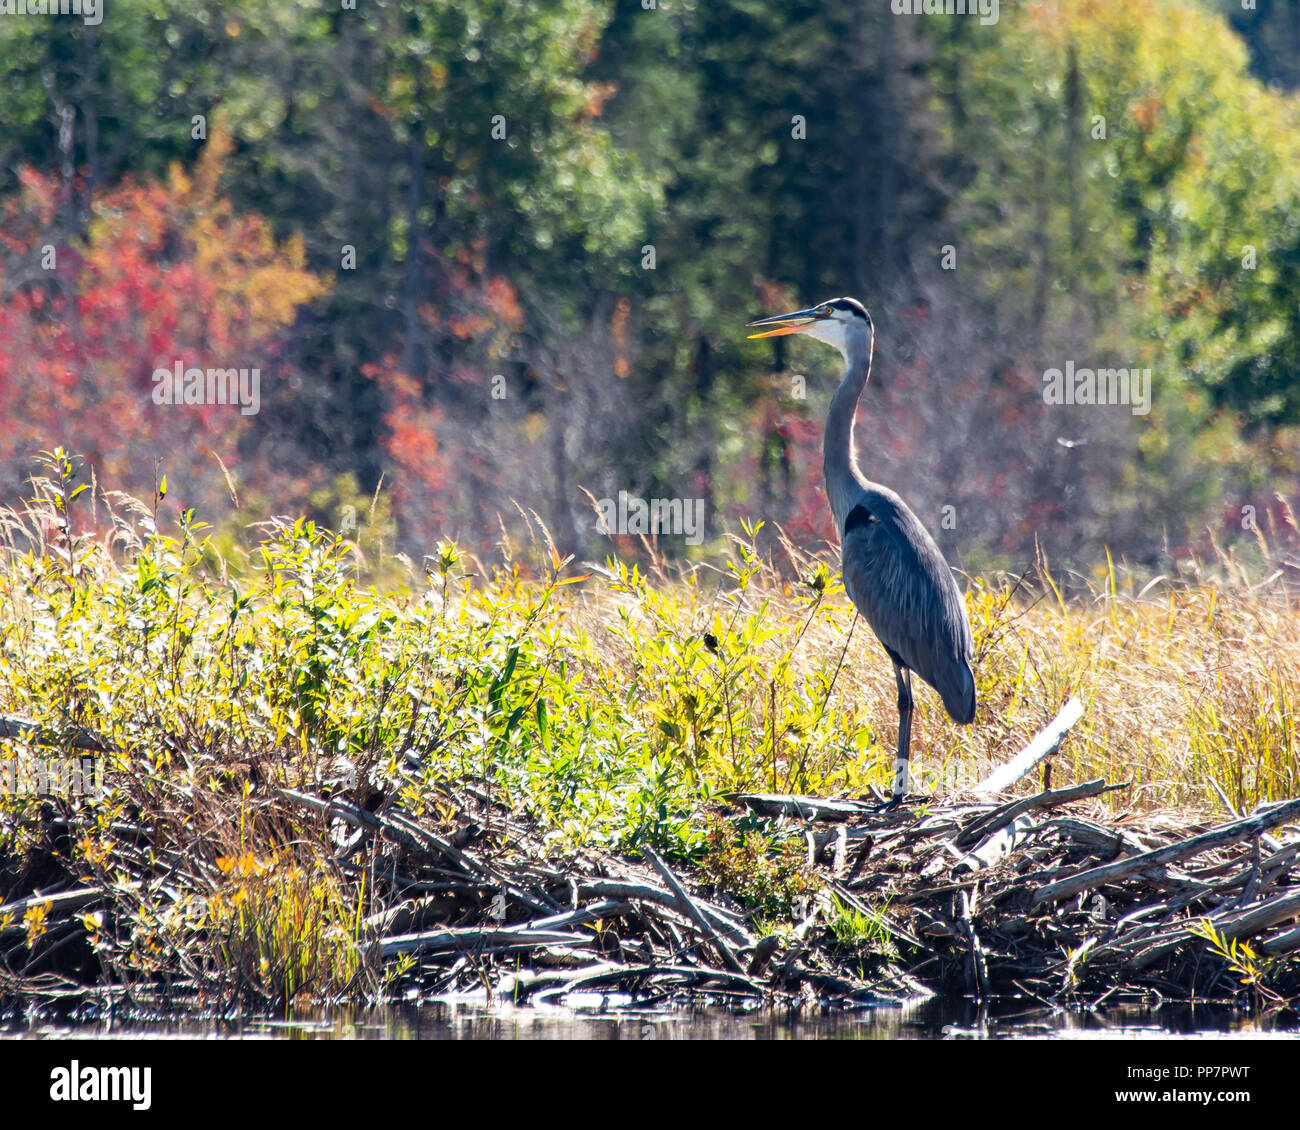 A great blue heron, Ardea herodias, standing on a beaver lodge on the edge of the Kunjamuk River in the Adirondack Mountains, NY USA in early autumn. Stock Photo